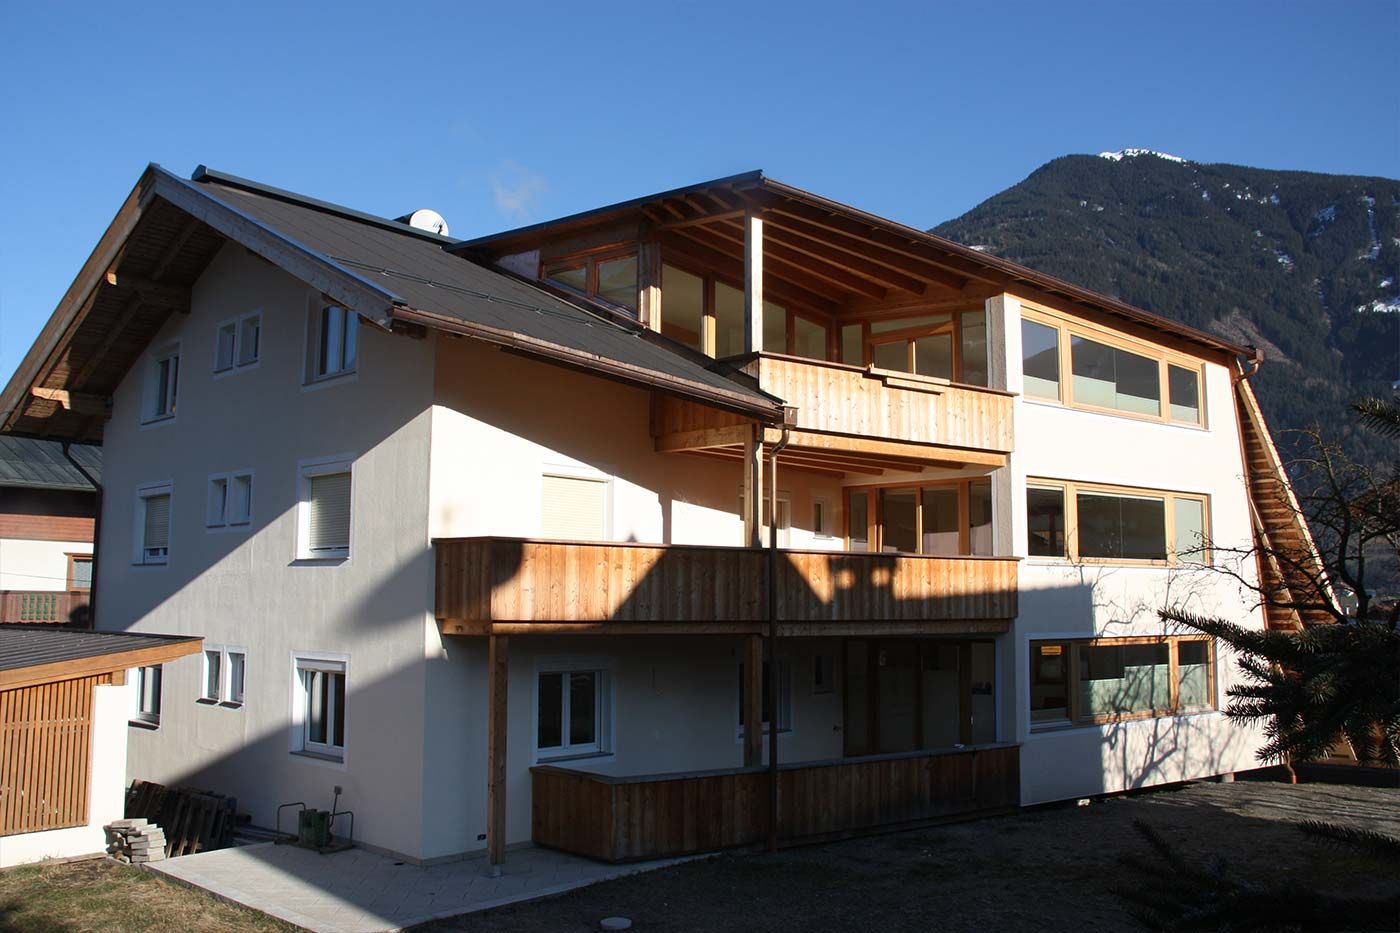 Newly built house with stunning views of the Zillertal mountains.